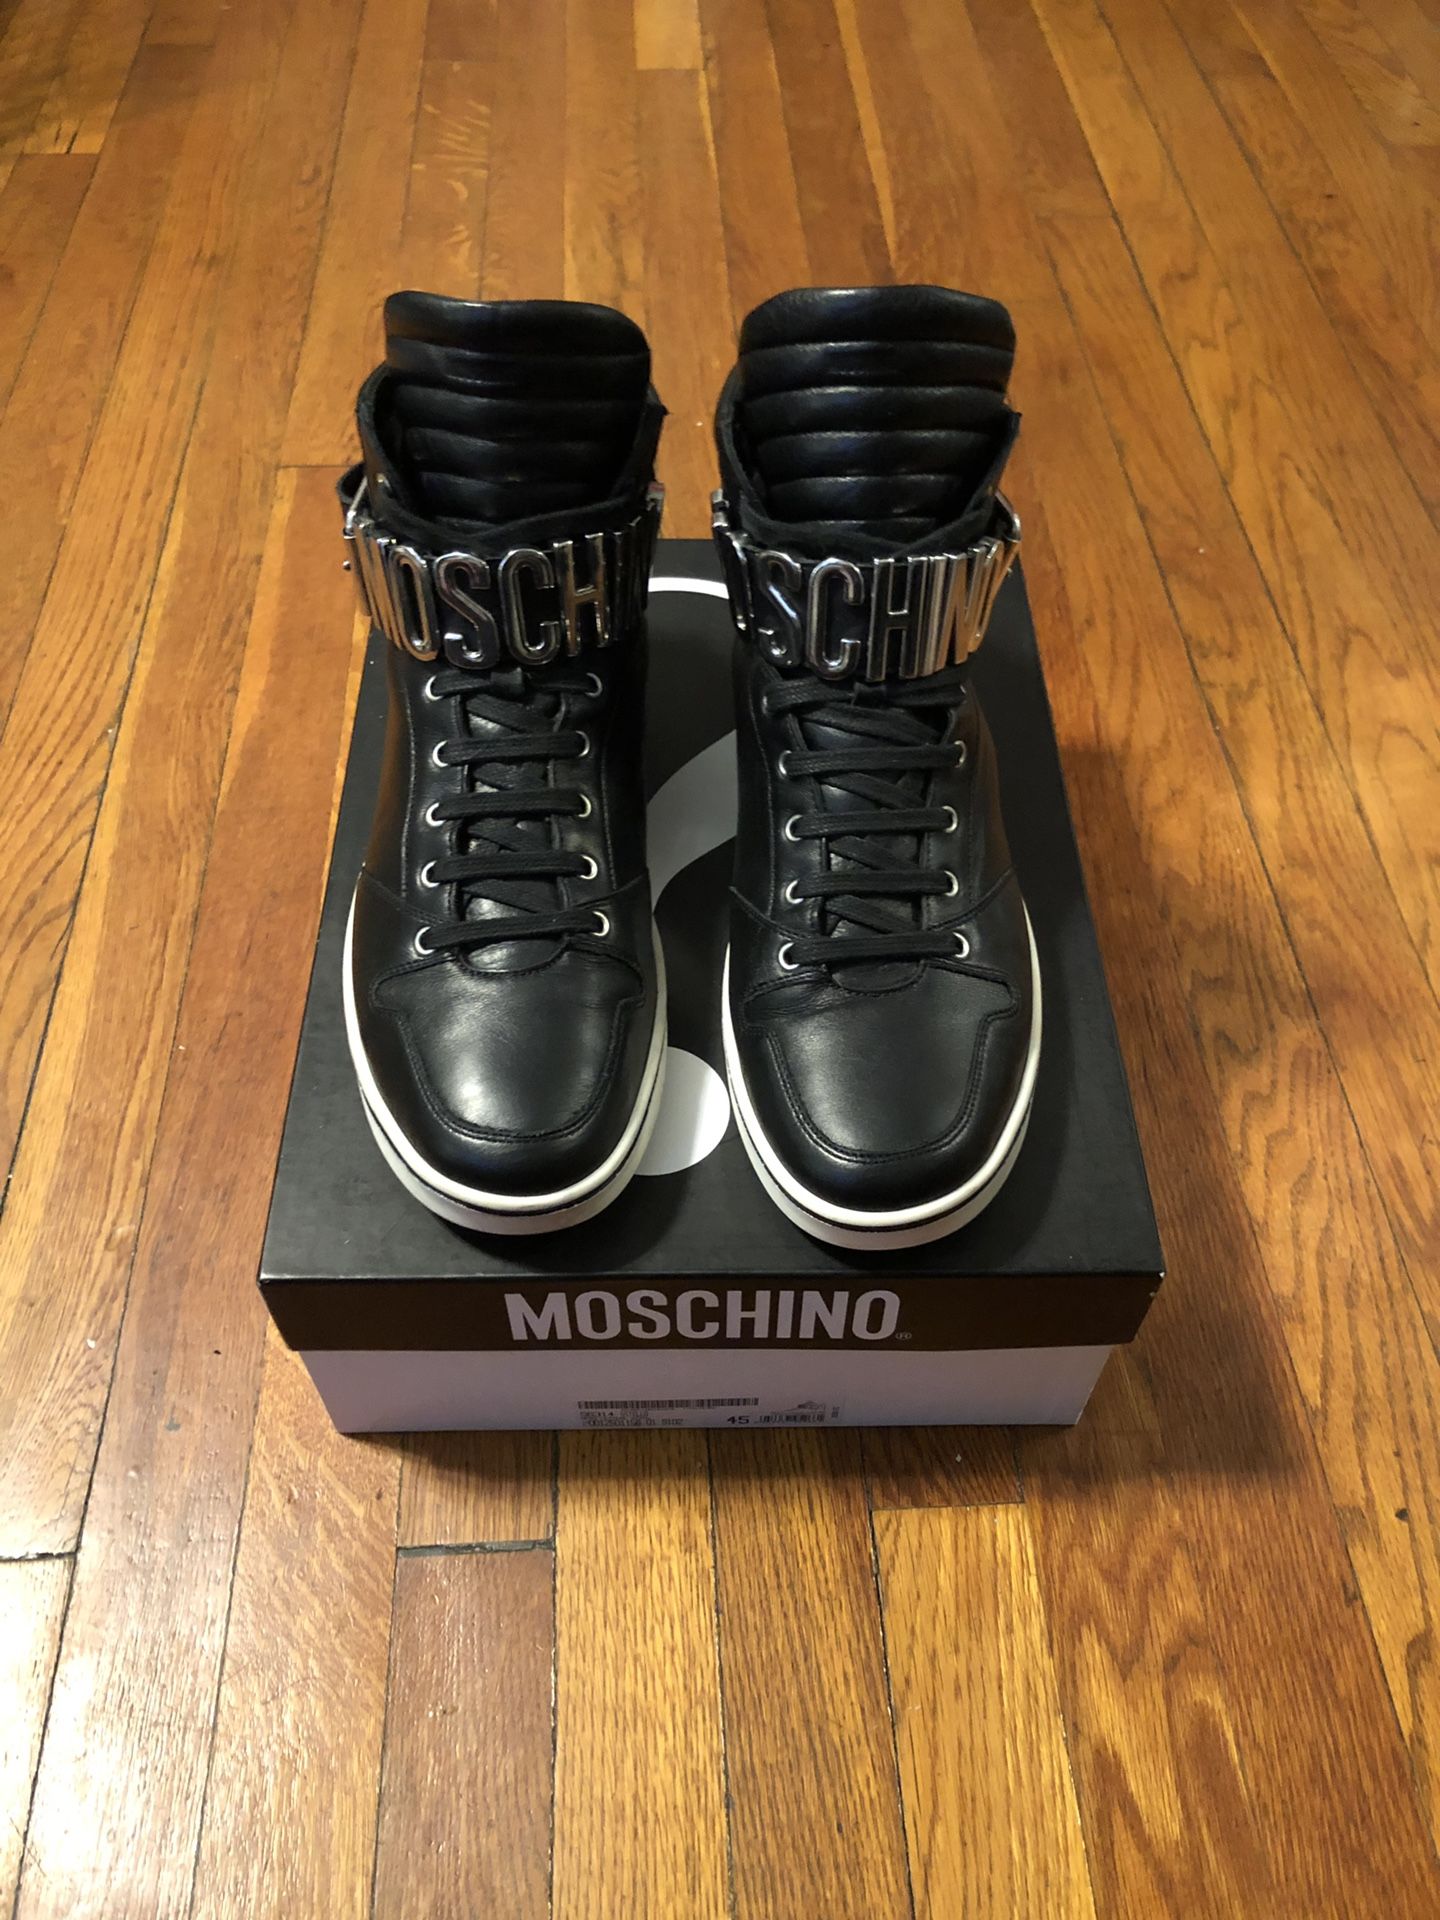 Men’s Moschino high top sneakers size 45 (12) paid $600